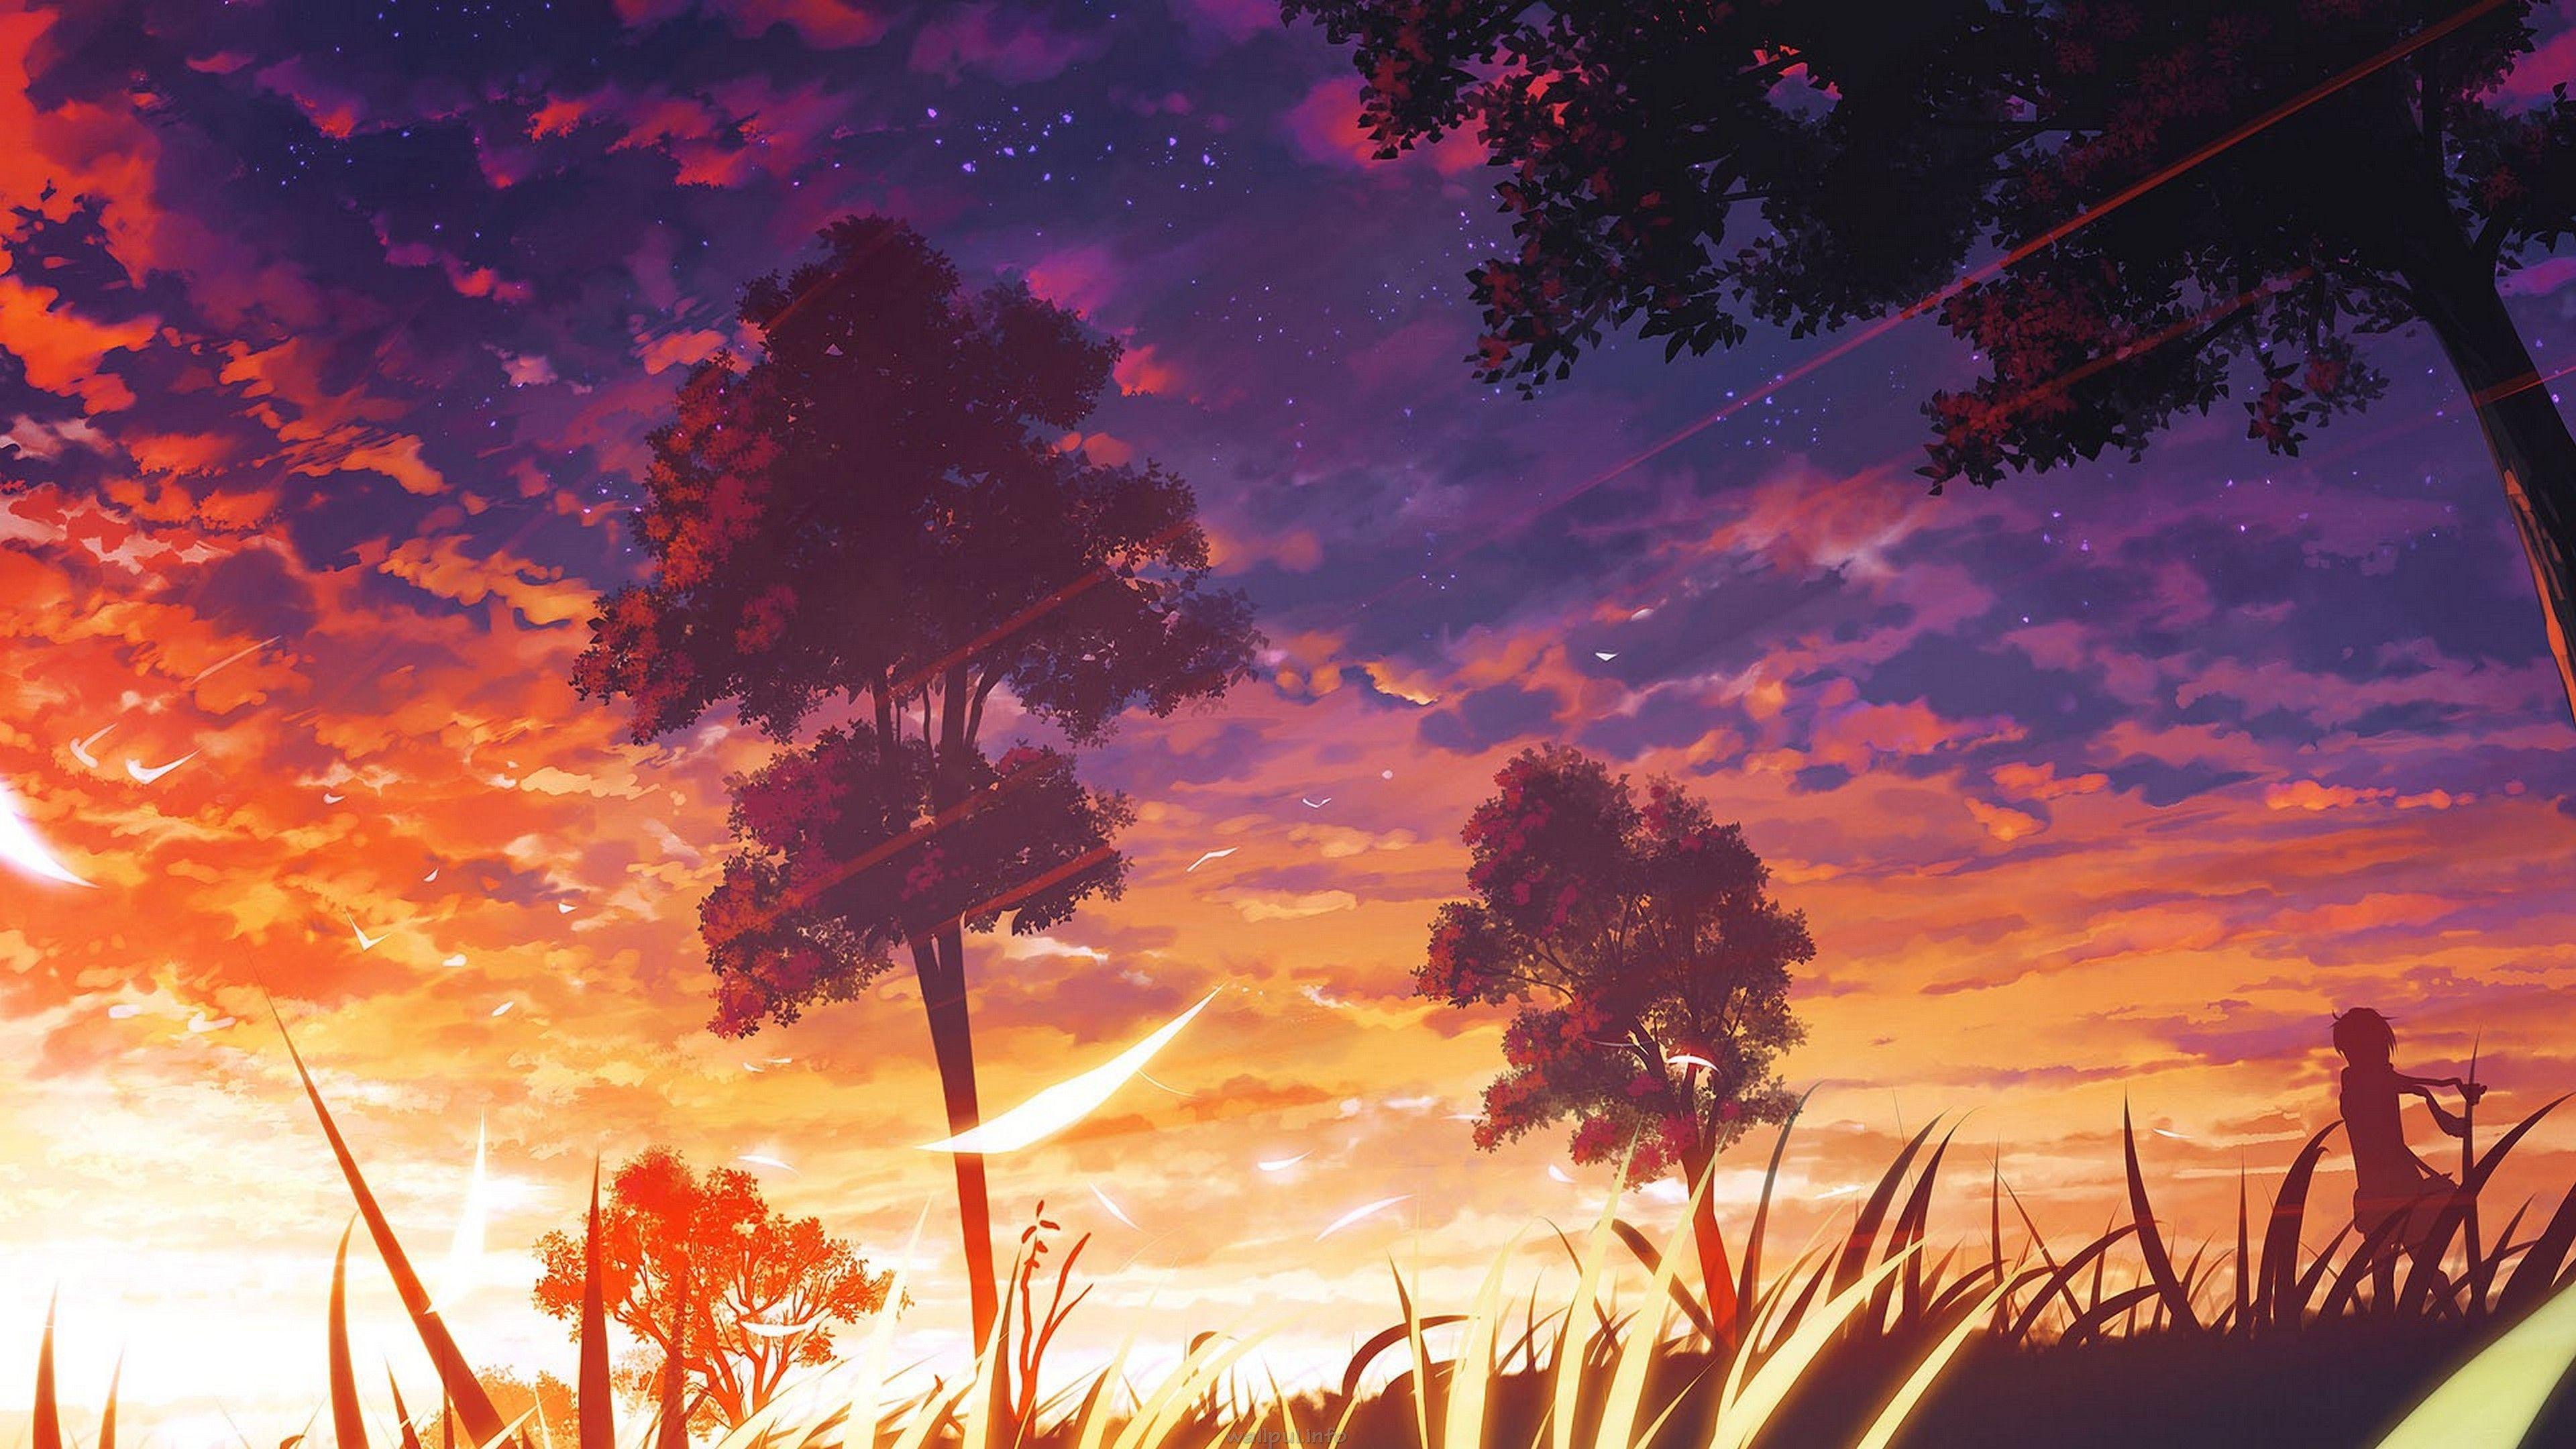 Anime landscape wallpaper 1920x1080 for android 50 anime landscape wallpaper 1920x1080 for android - 3840x2160